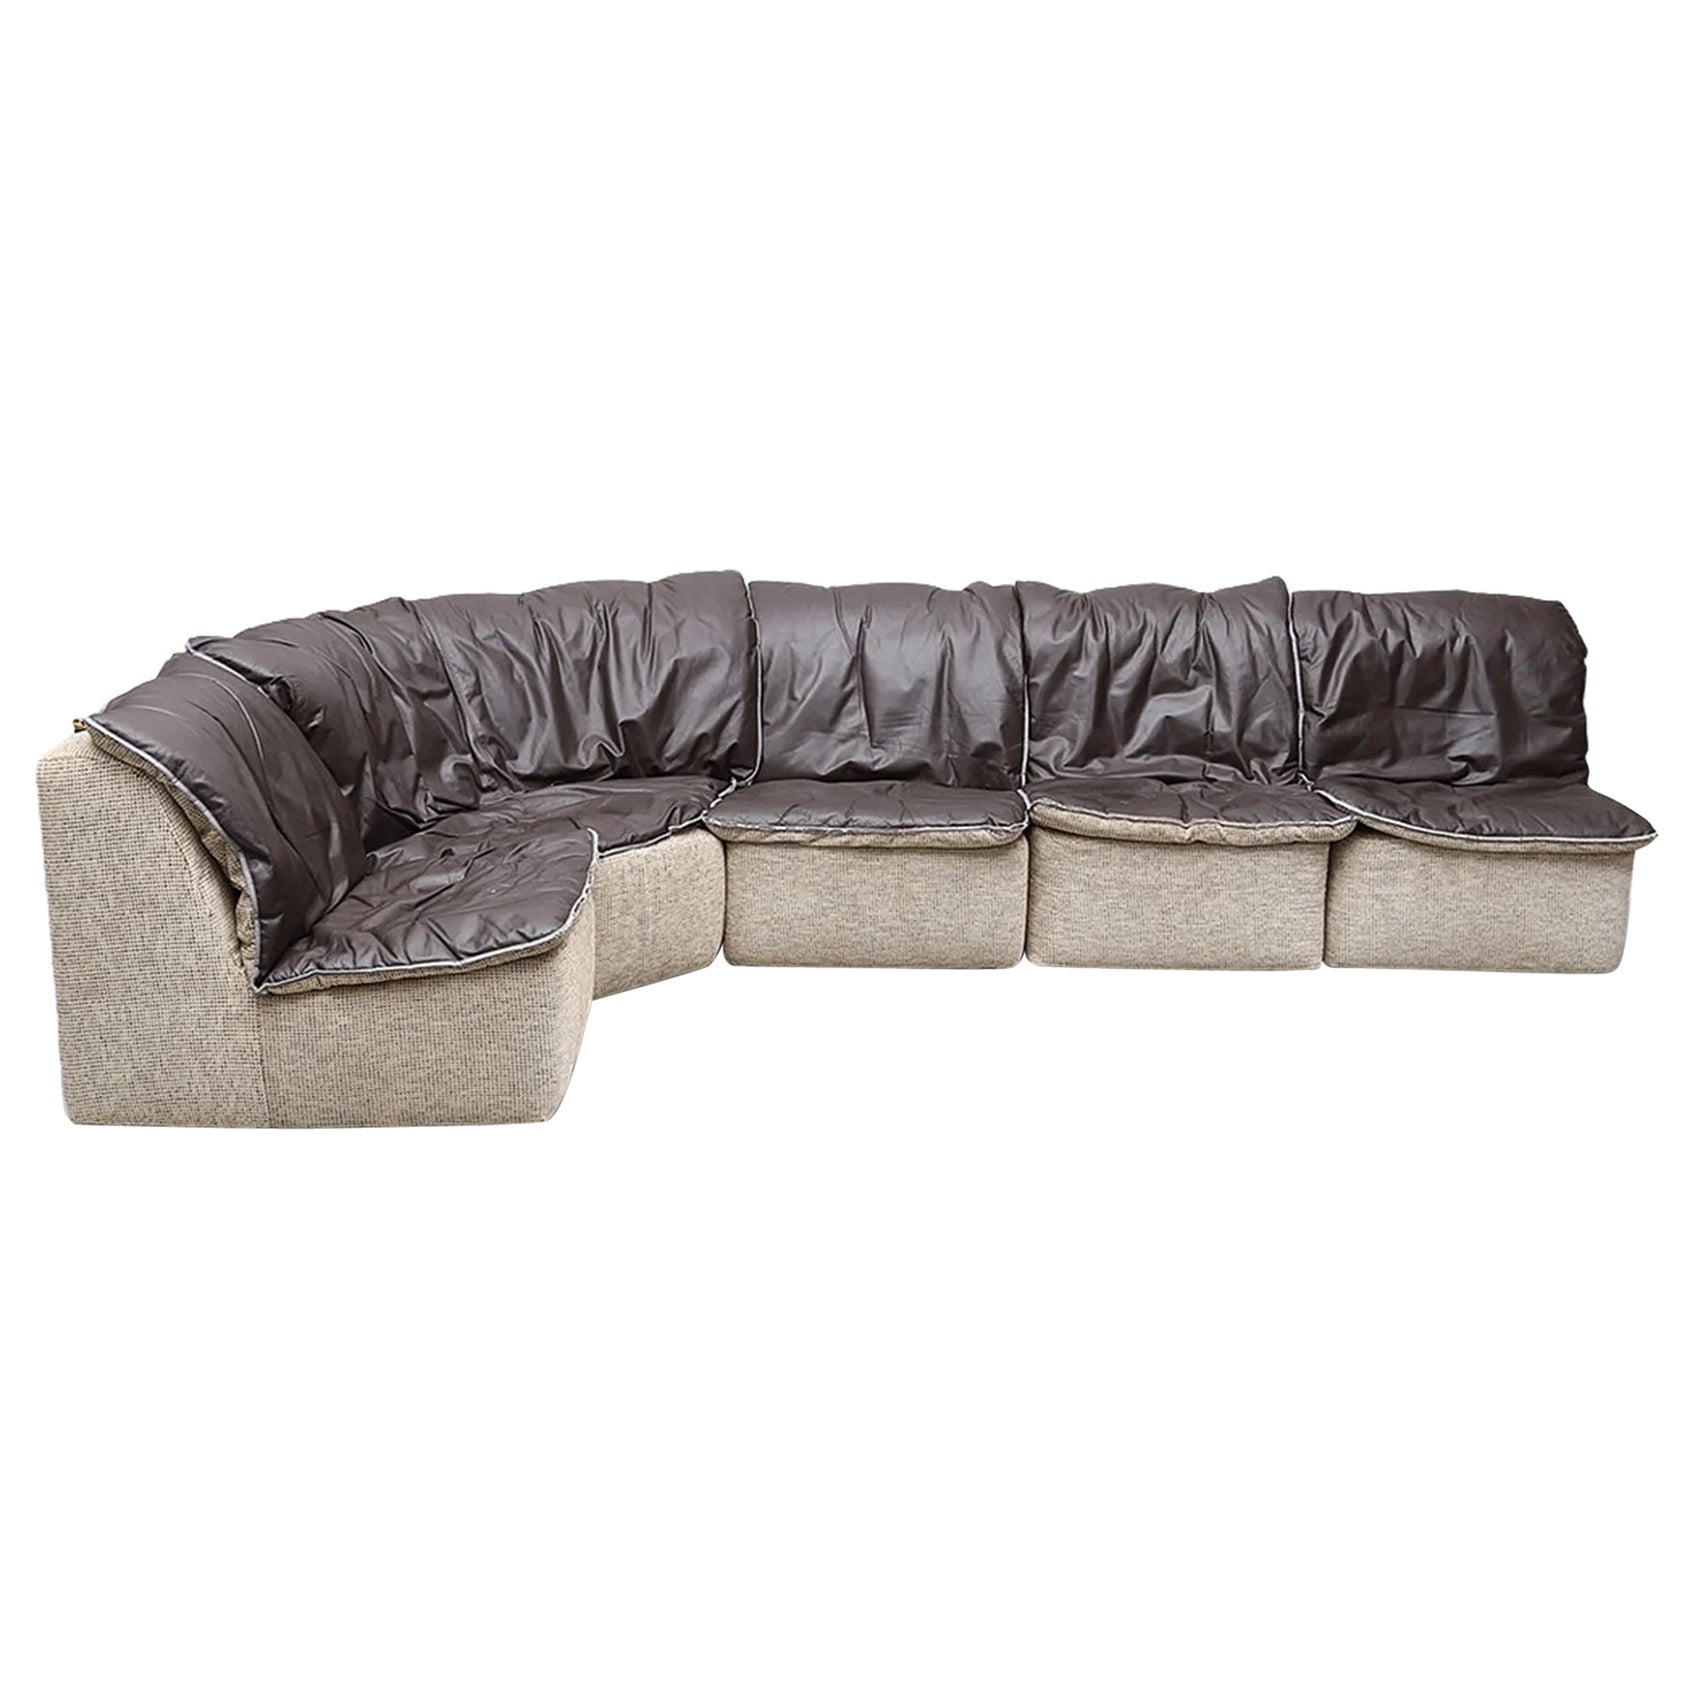 1970s five piece modular sofa in fleece + leather with reversible cushions For Sale